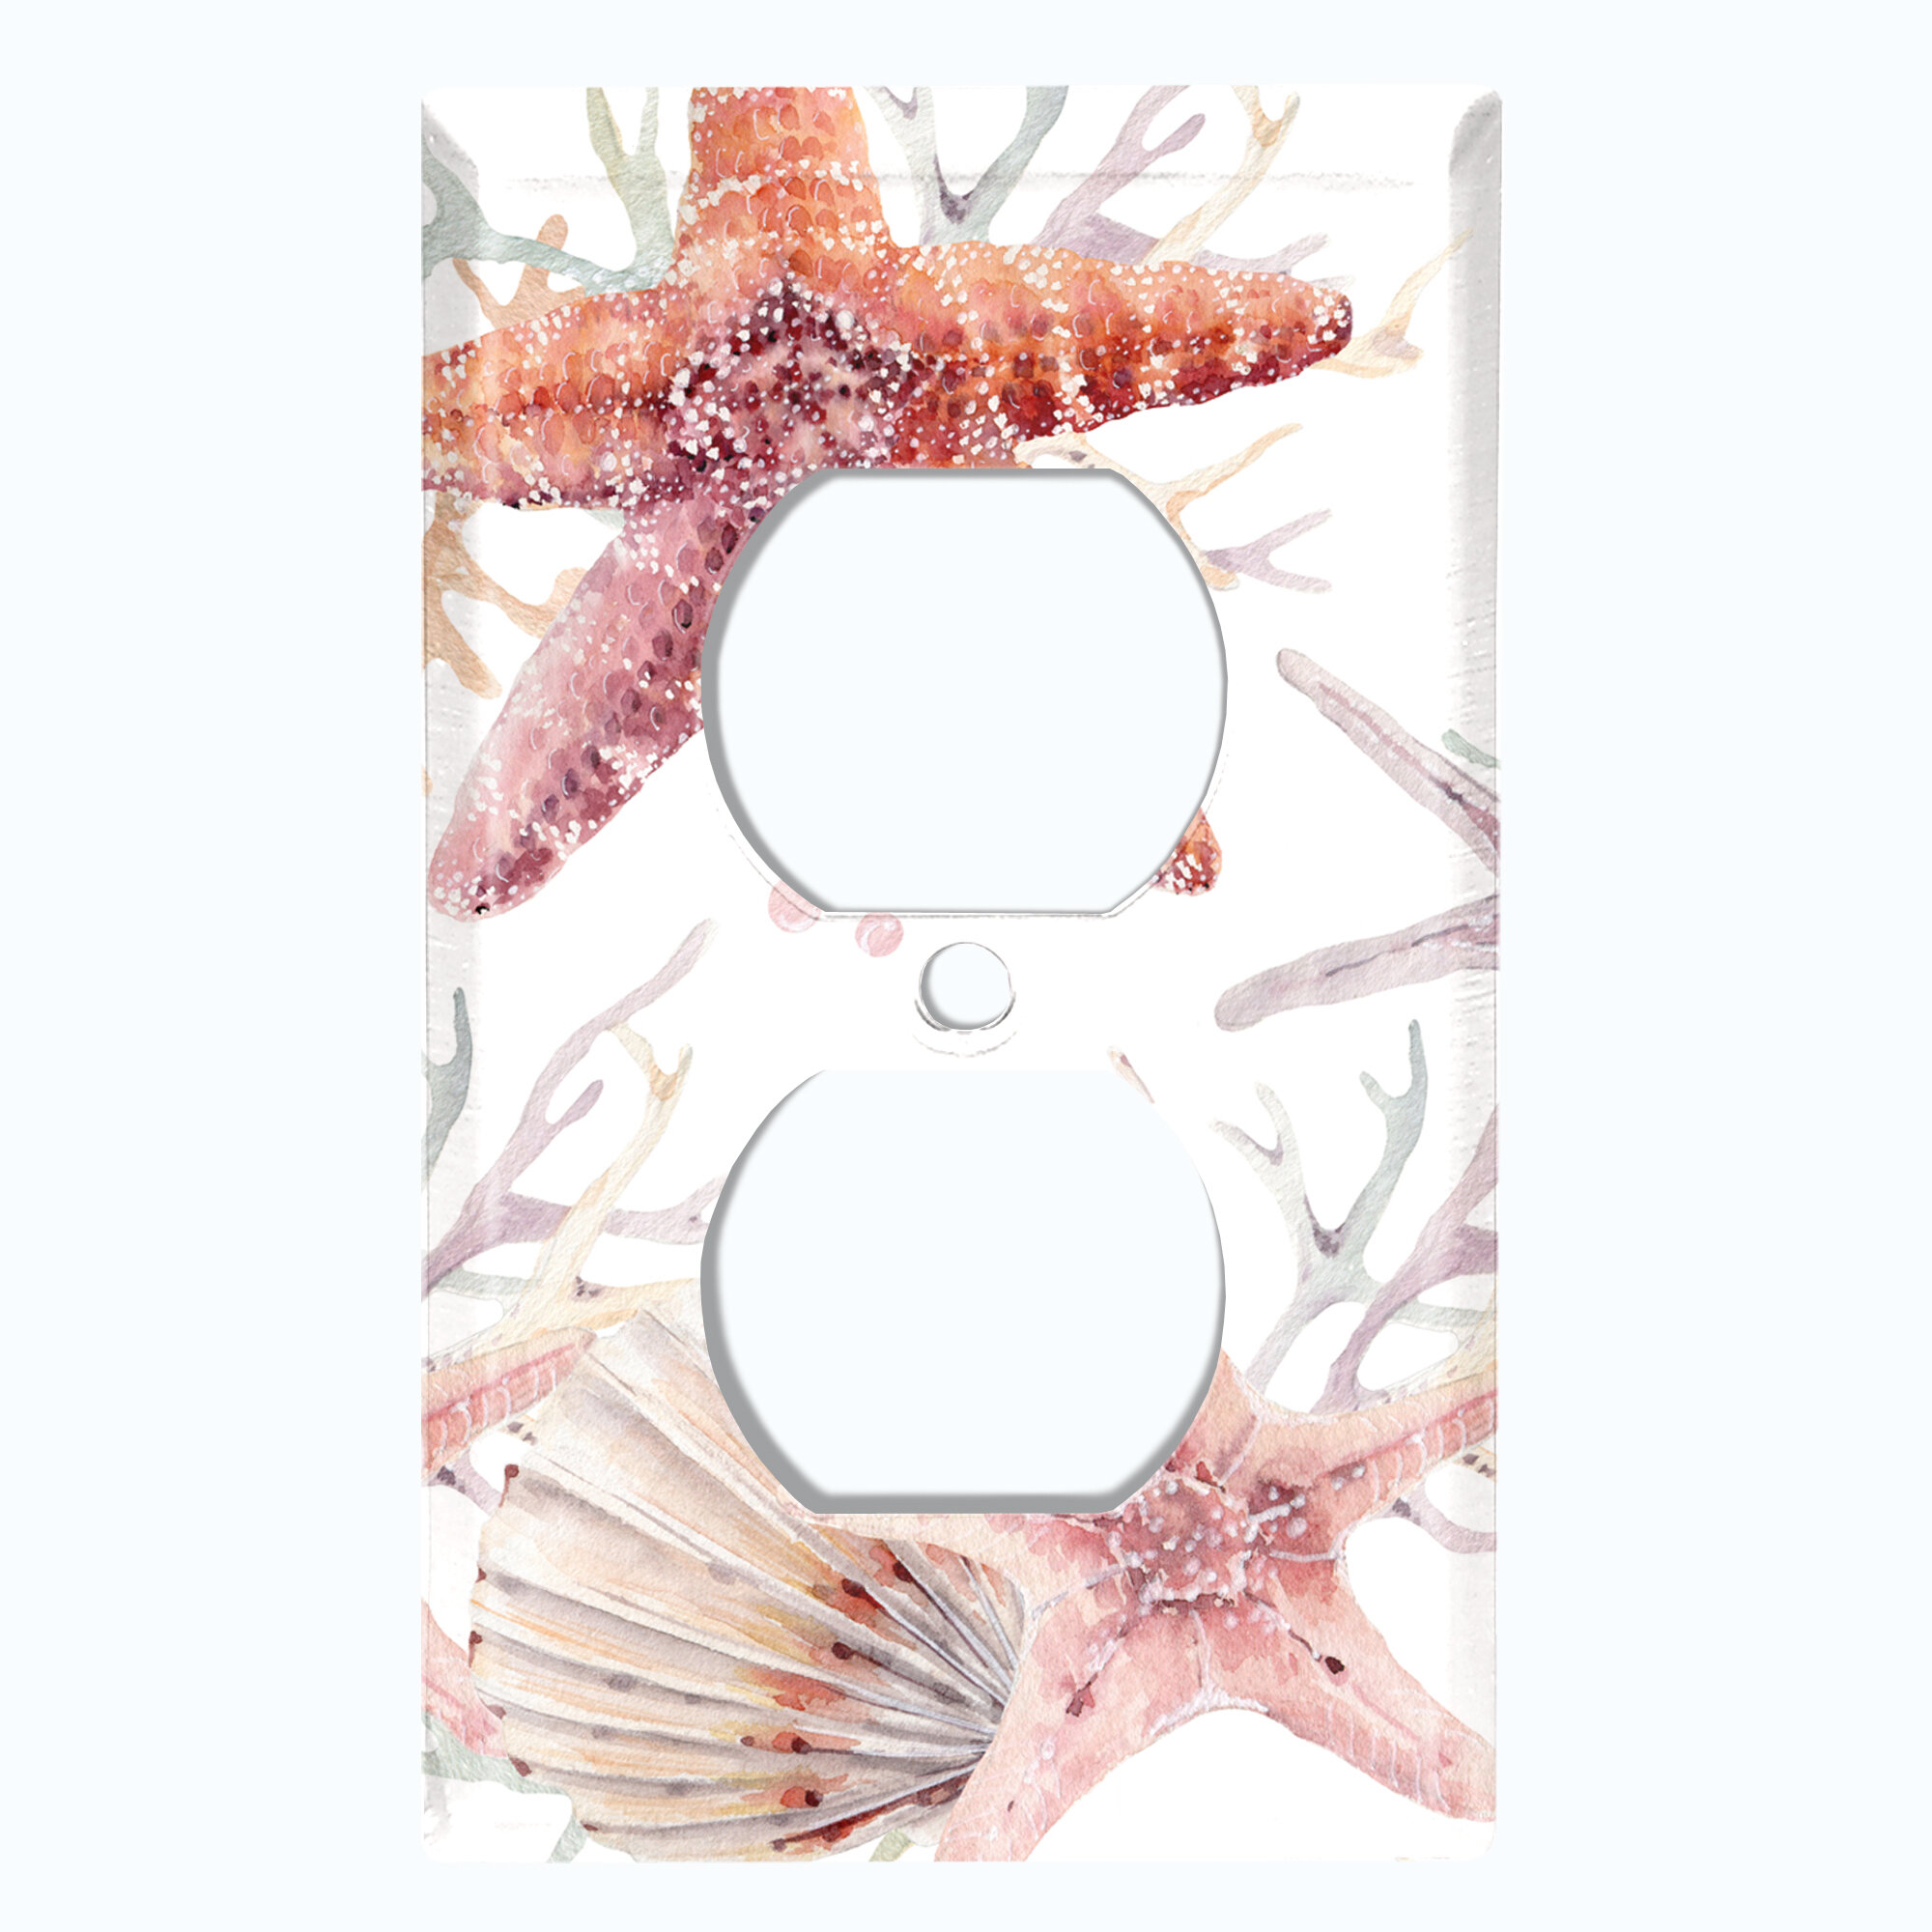 WorldAcc Metal Light Switch Plate Outlet Cover (Star Fish Clam